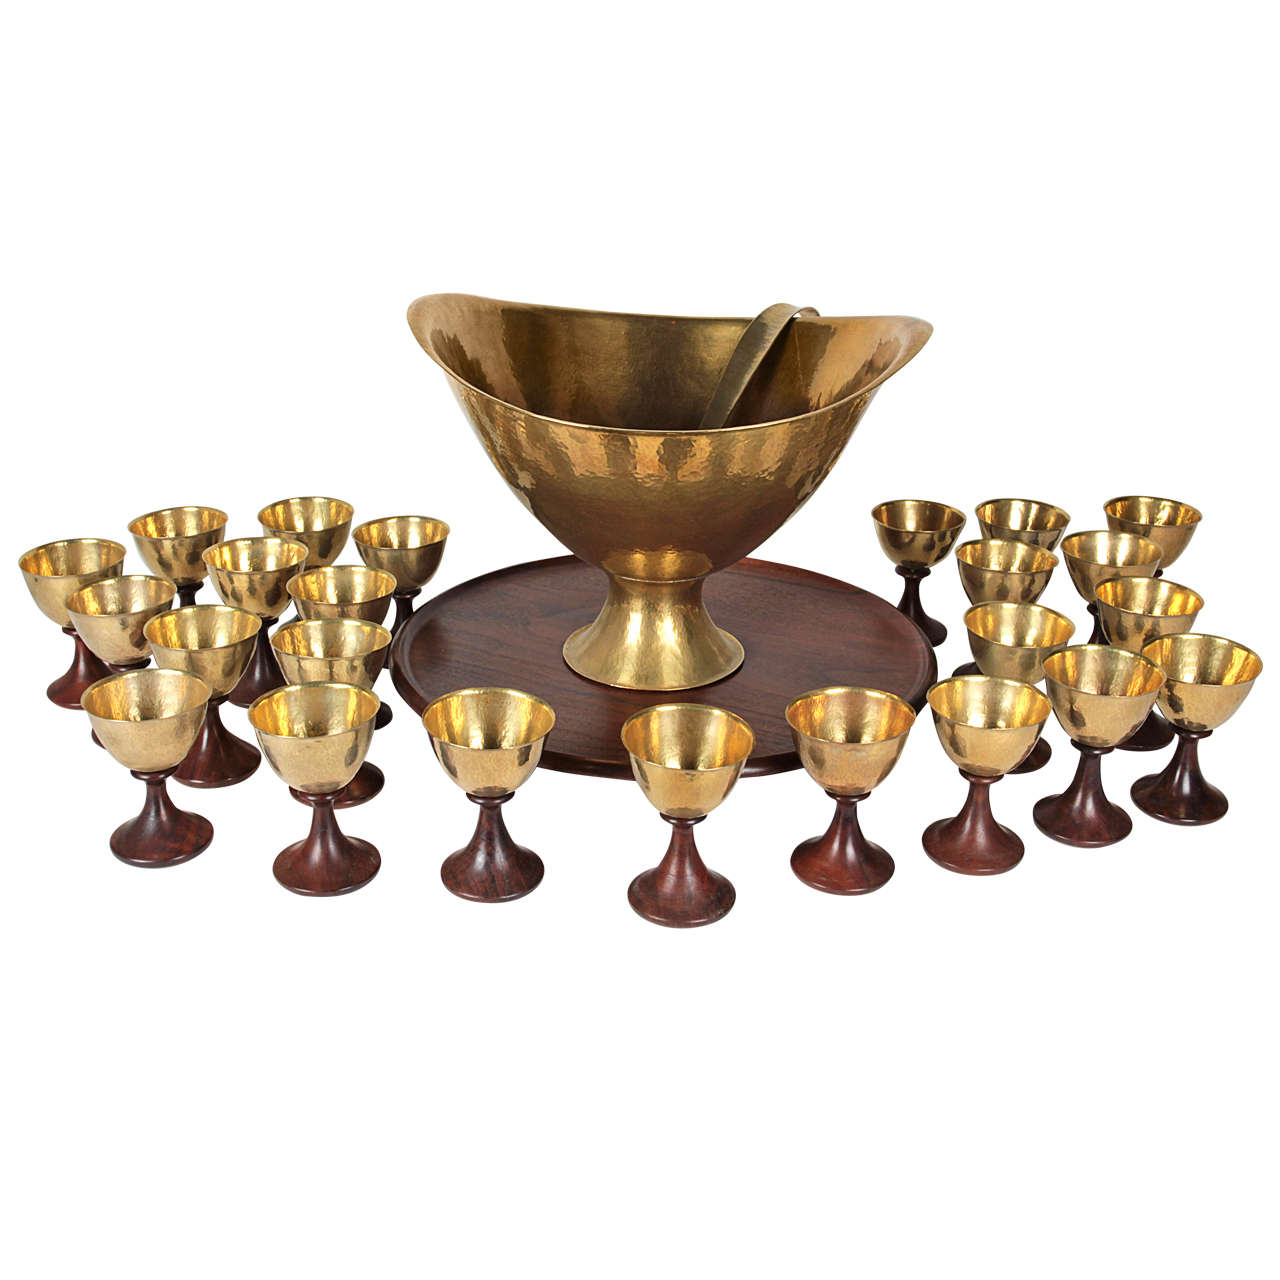 Lawrence Hunter Hand Wrought Brass and Walnut Punch Set c.1965 For Sale